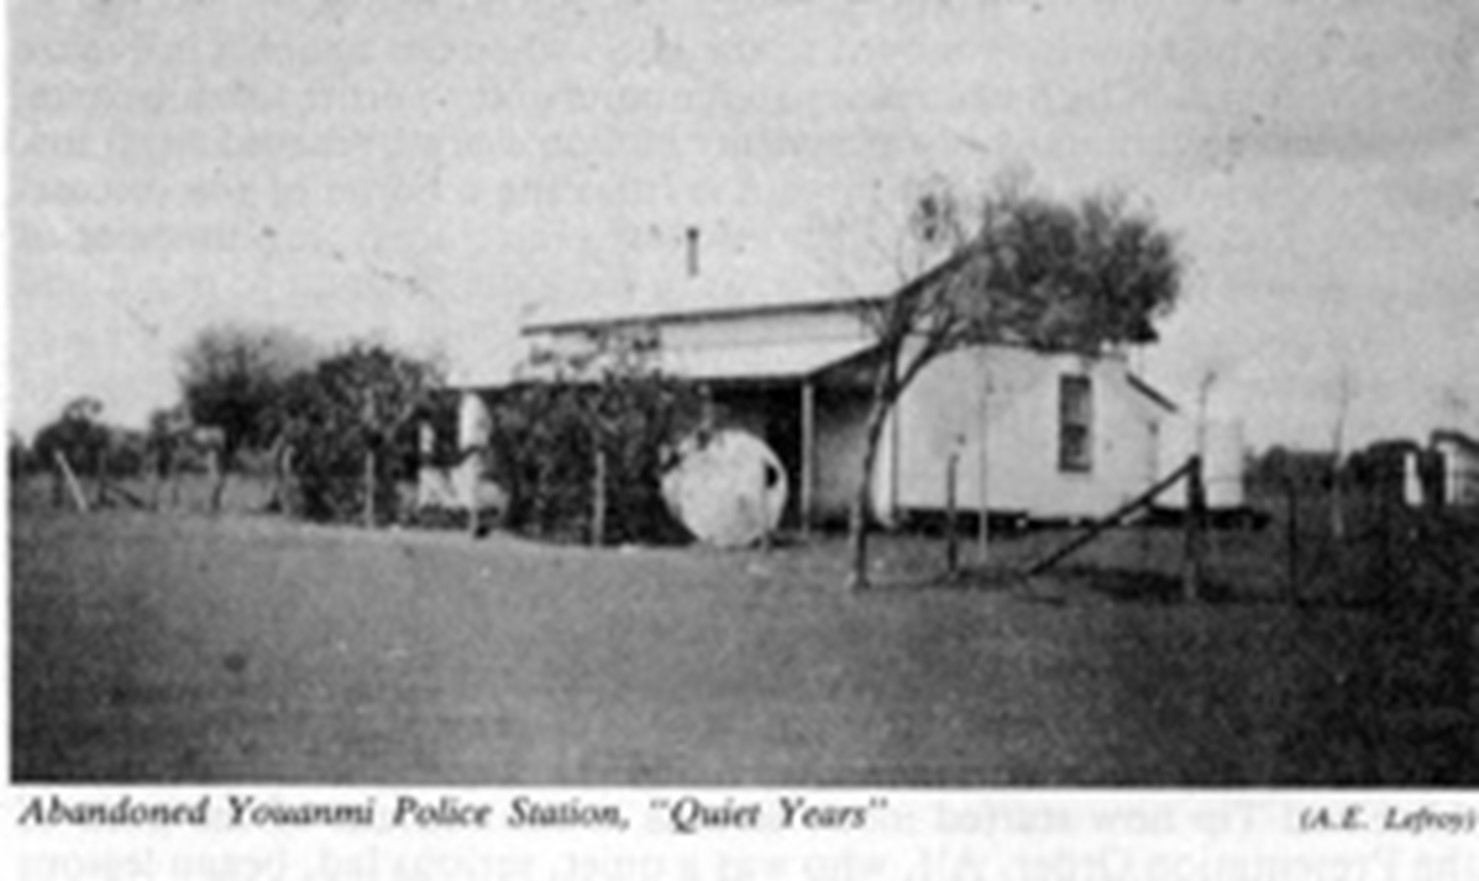 Youanmi Police Station